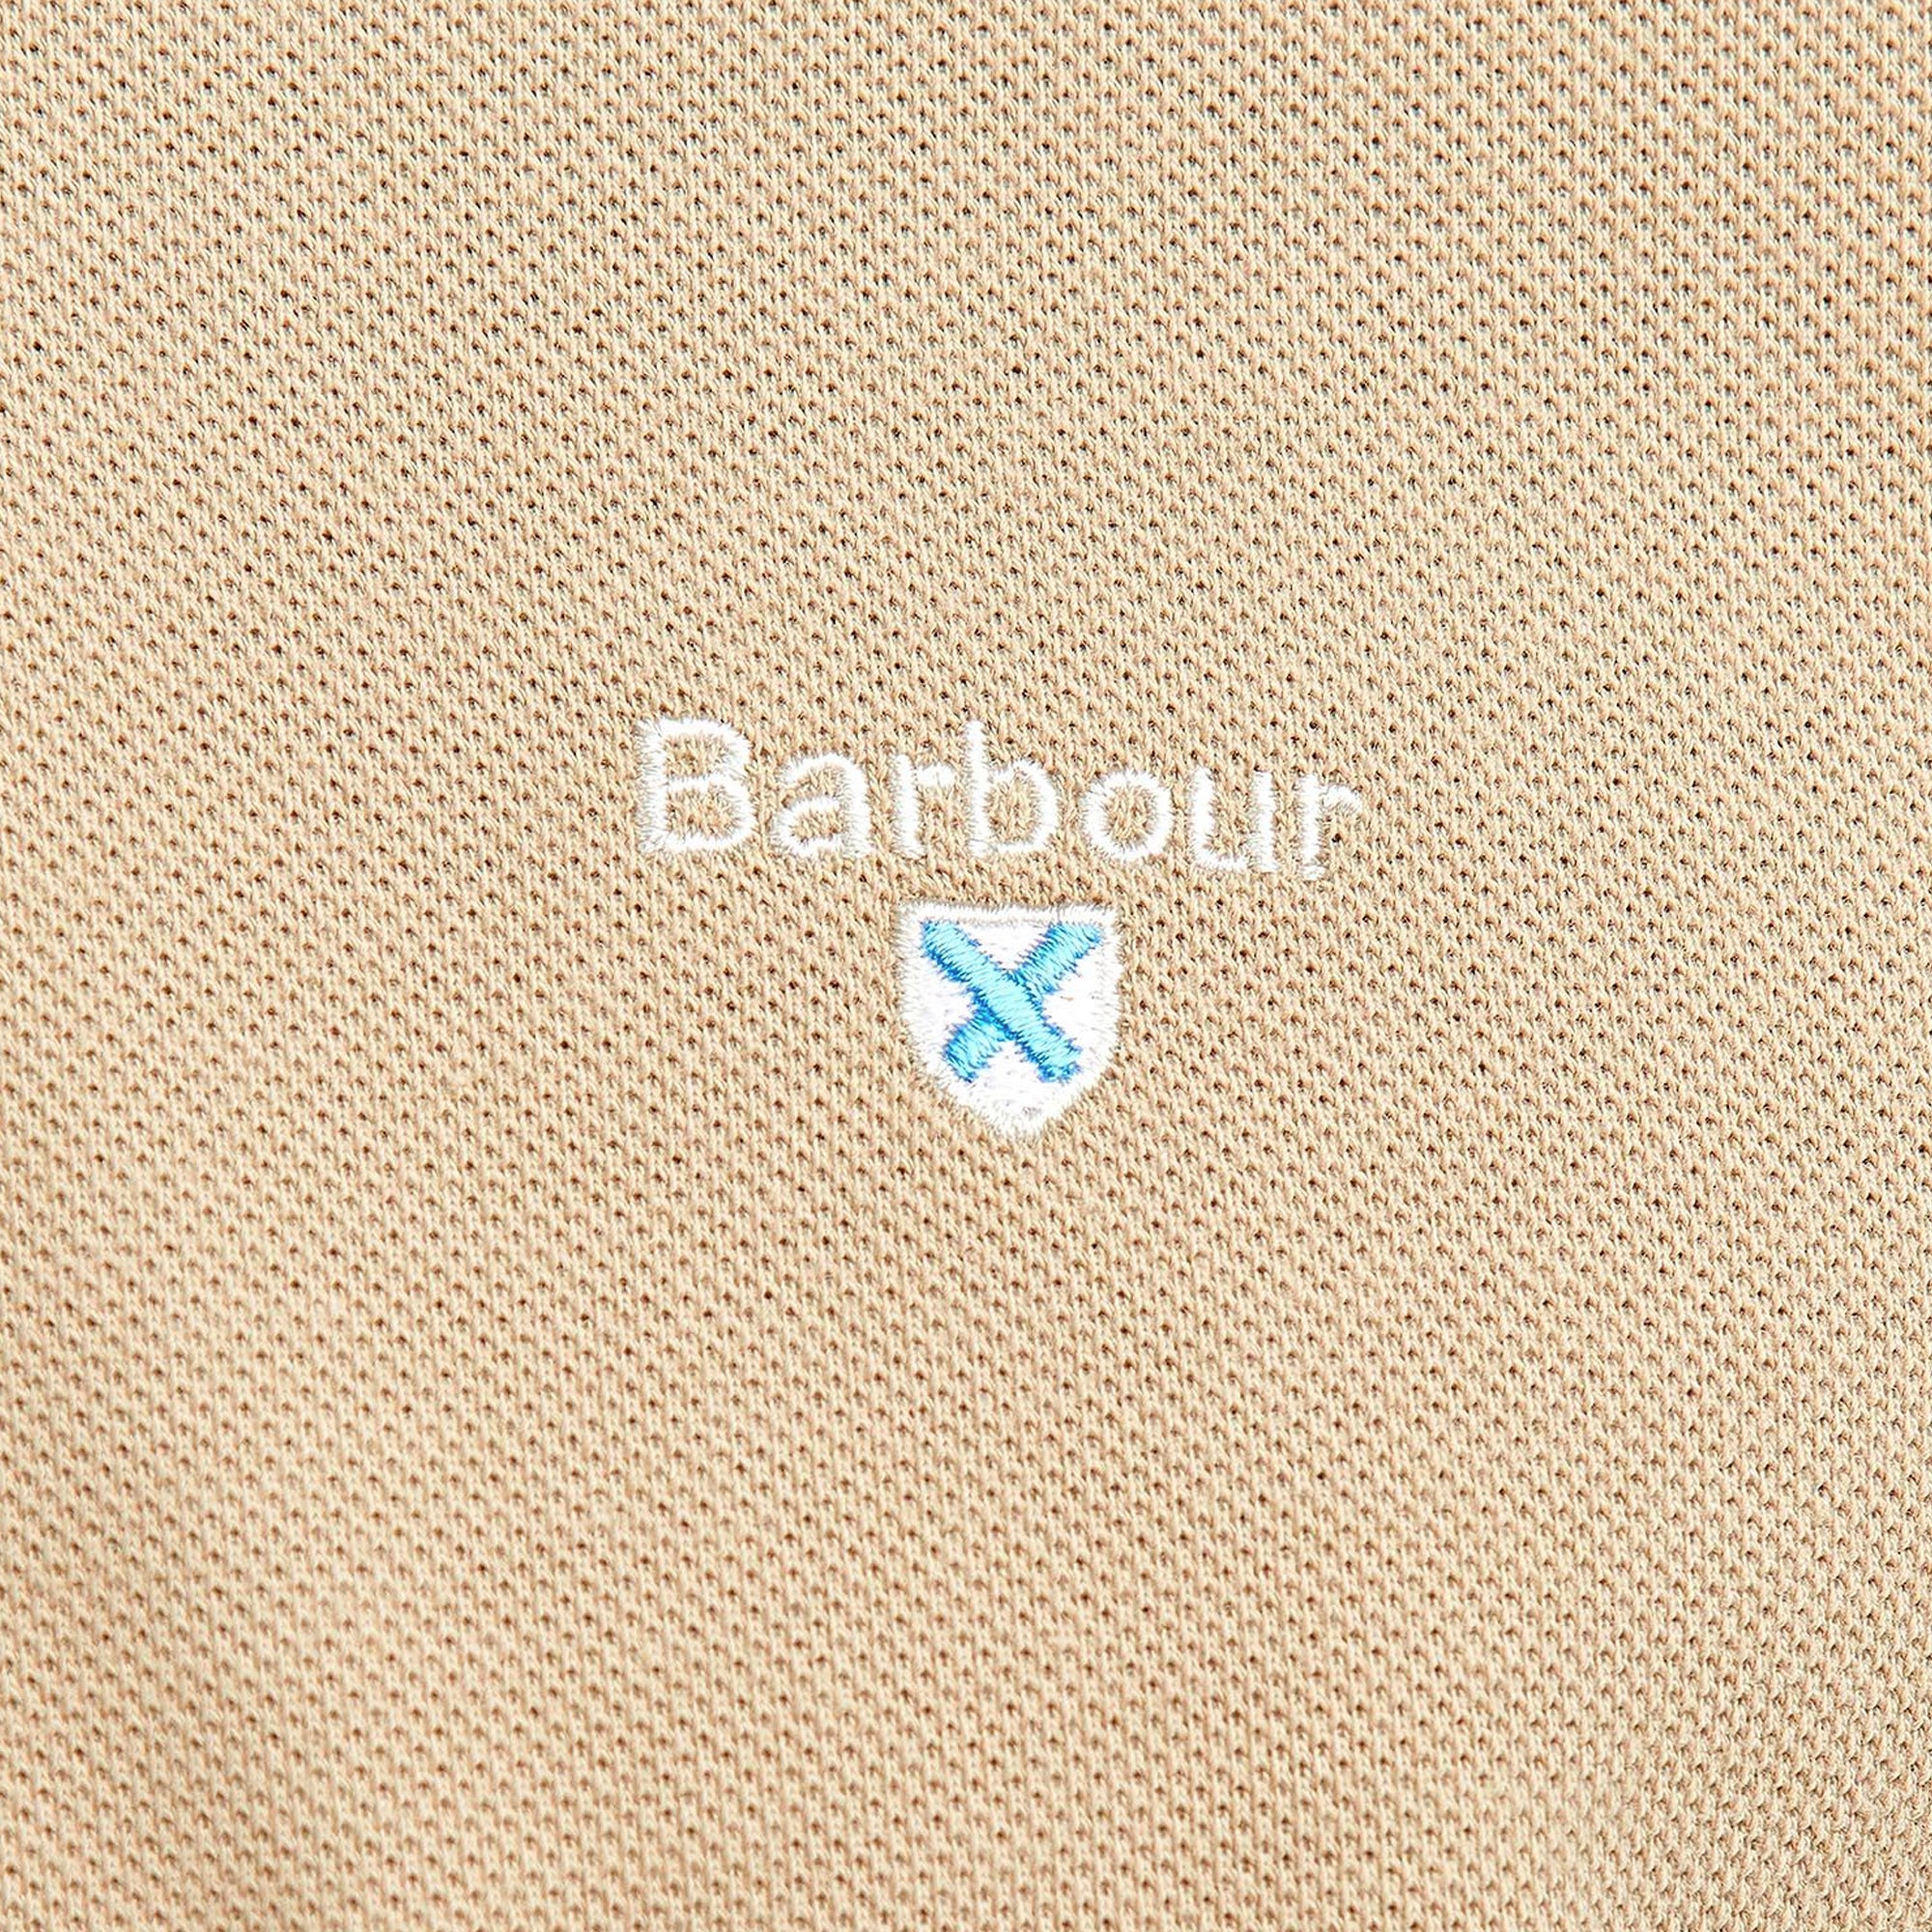 Barbour Harrowgate Polo Shirt - Washed Stone